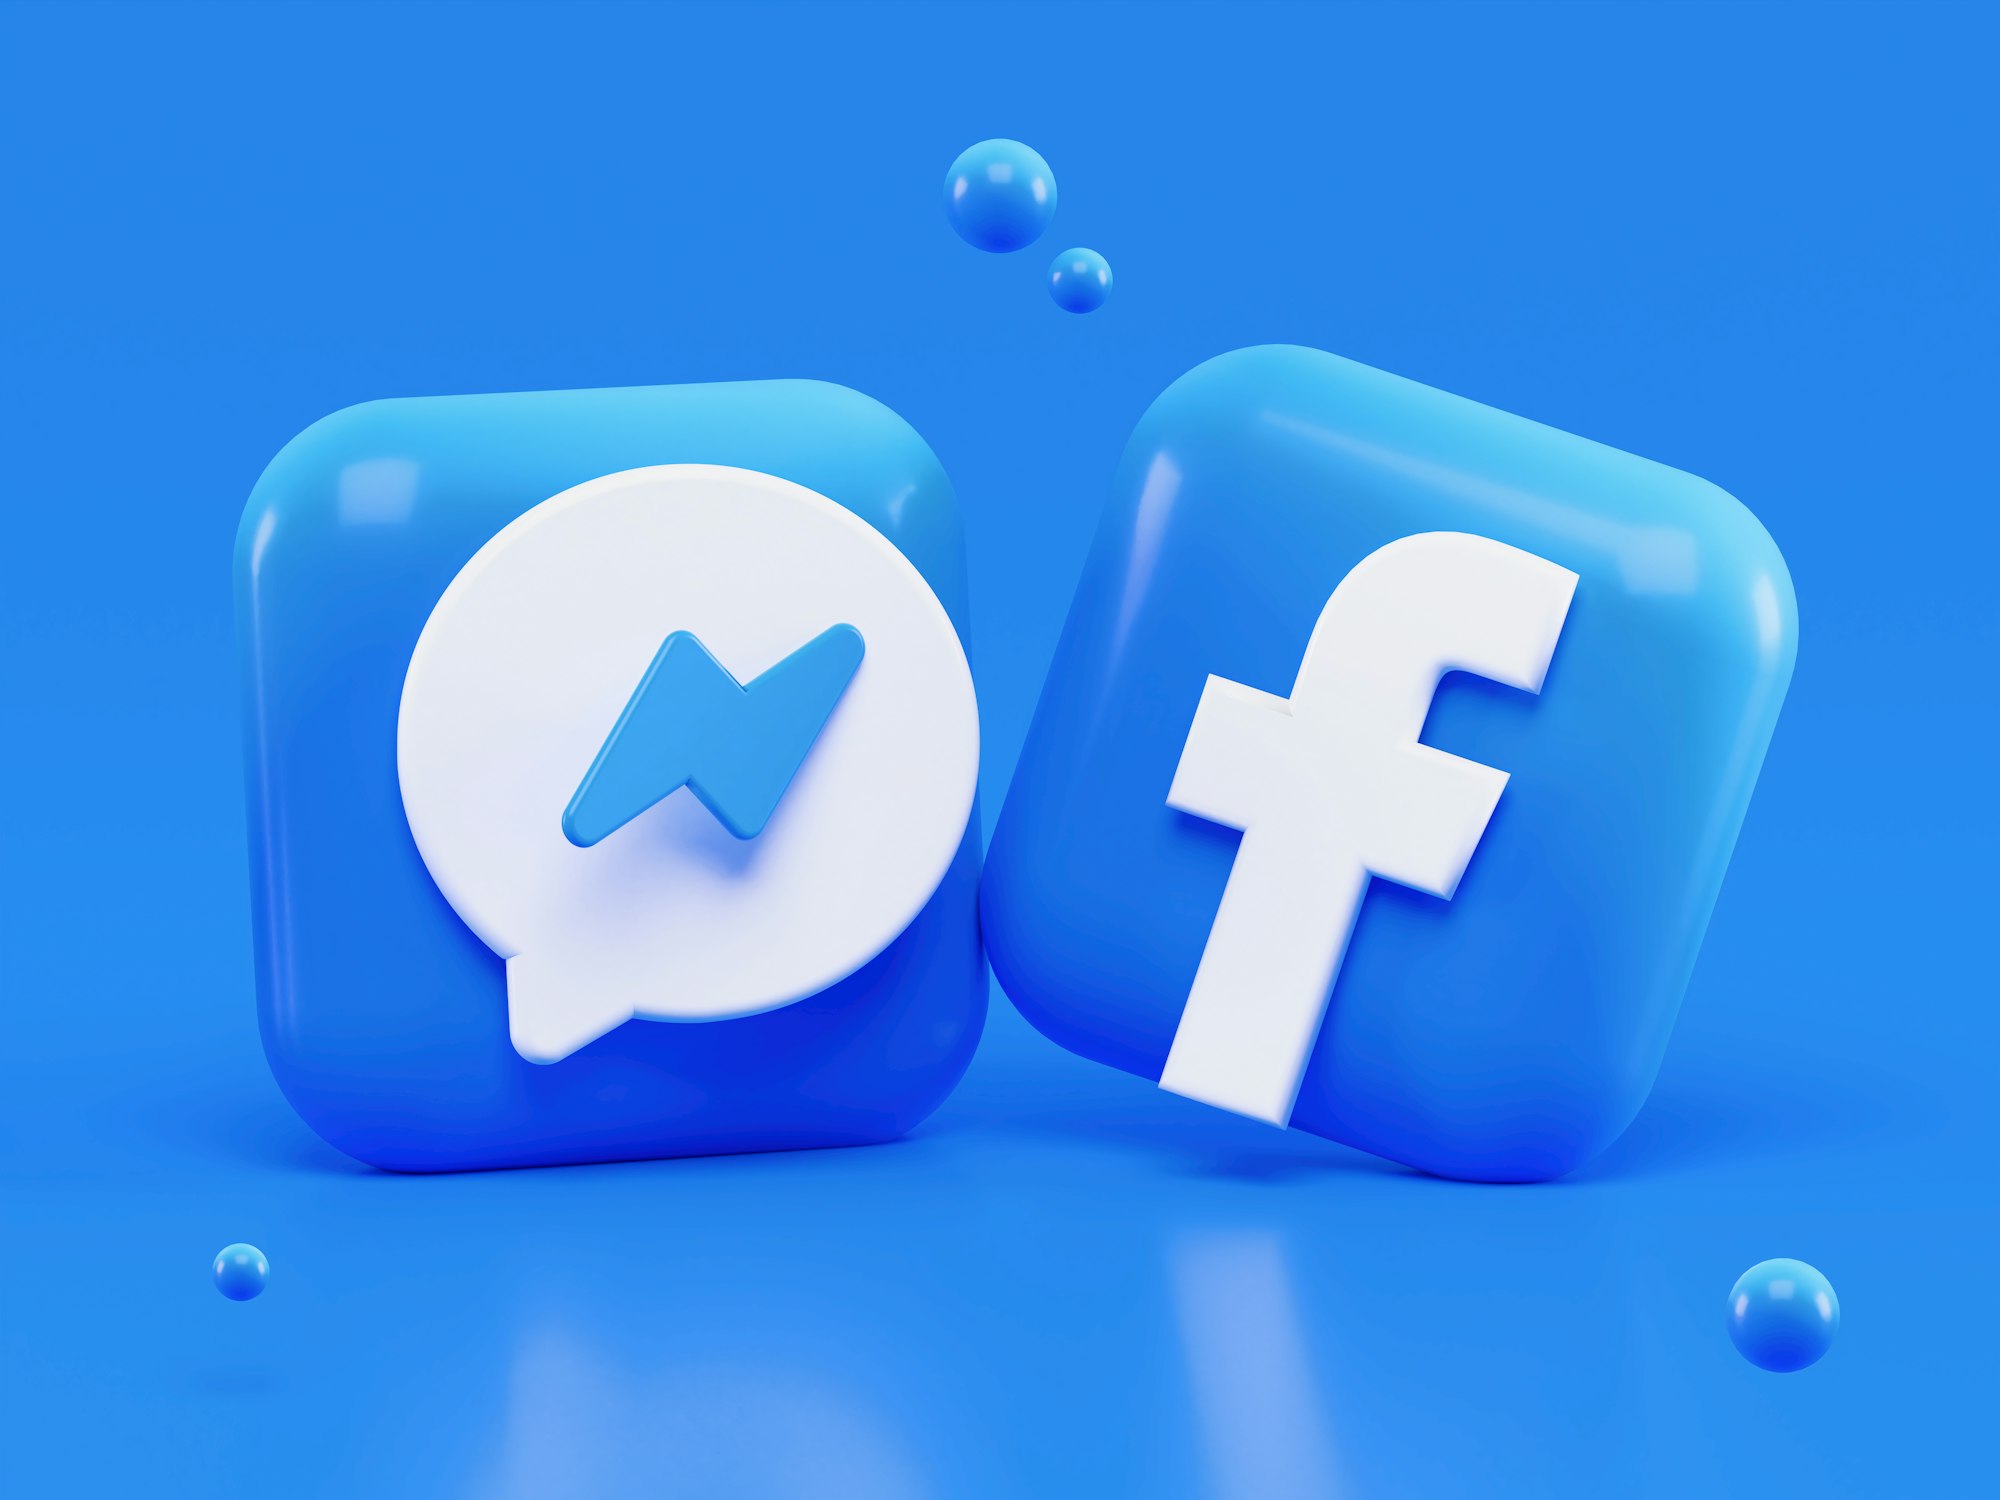 Facebook & Messenger 3D icons concept. Write me: alexanderbemore@gmail.com, if you need 3D visuals for your products.